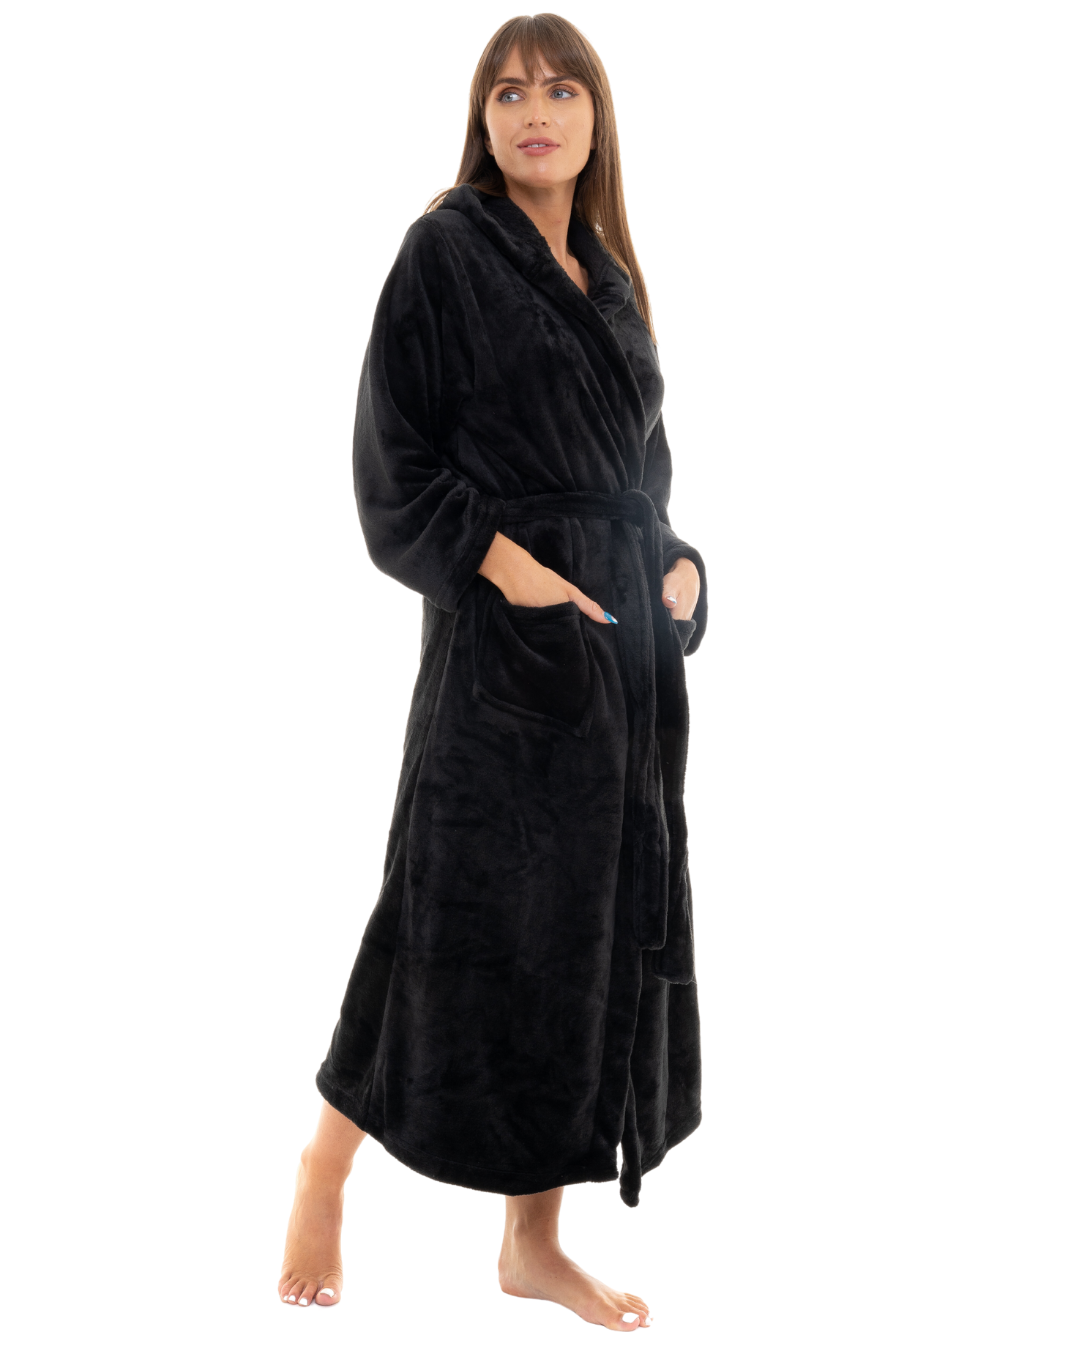 Loungeable luxury fleece hooded robe with satin trim in black | ASOS